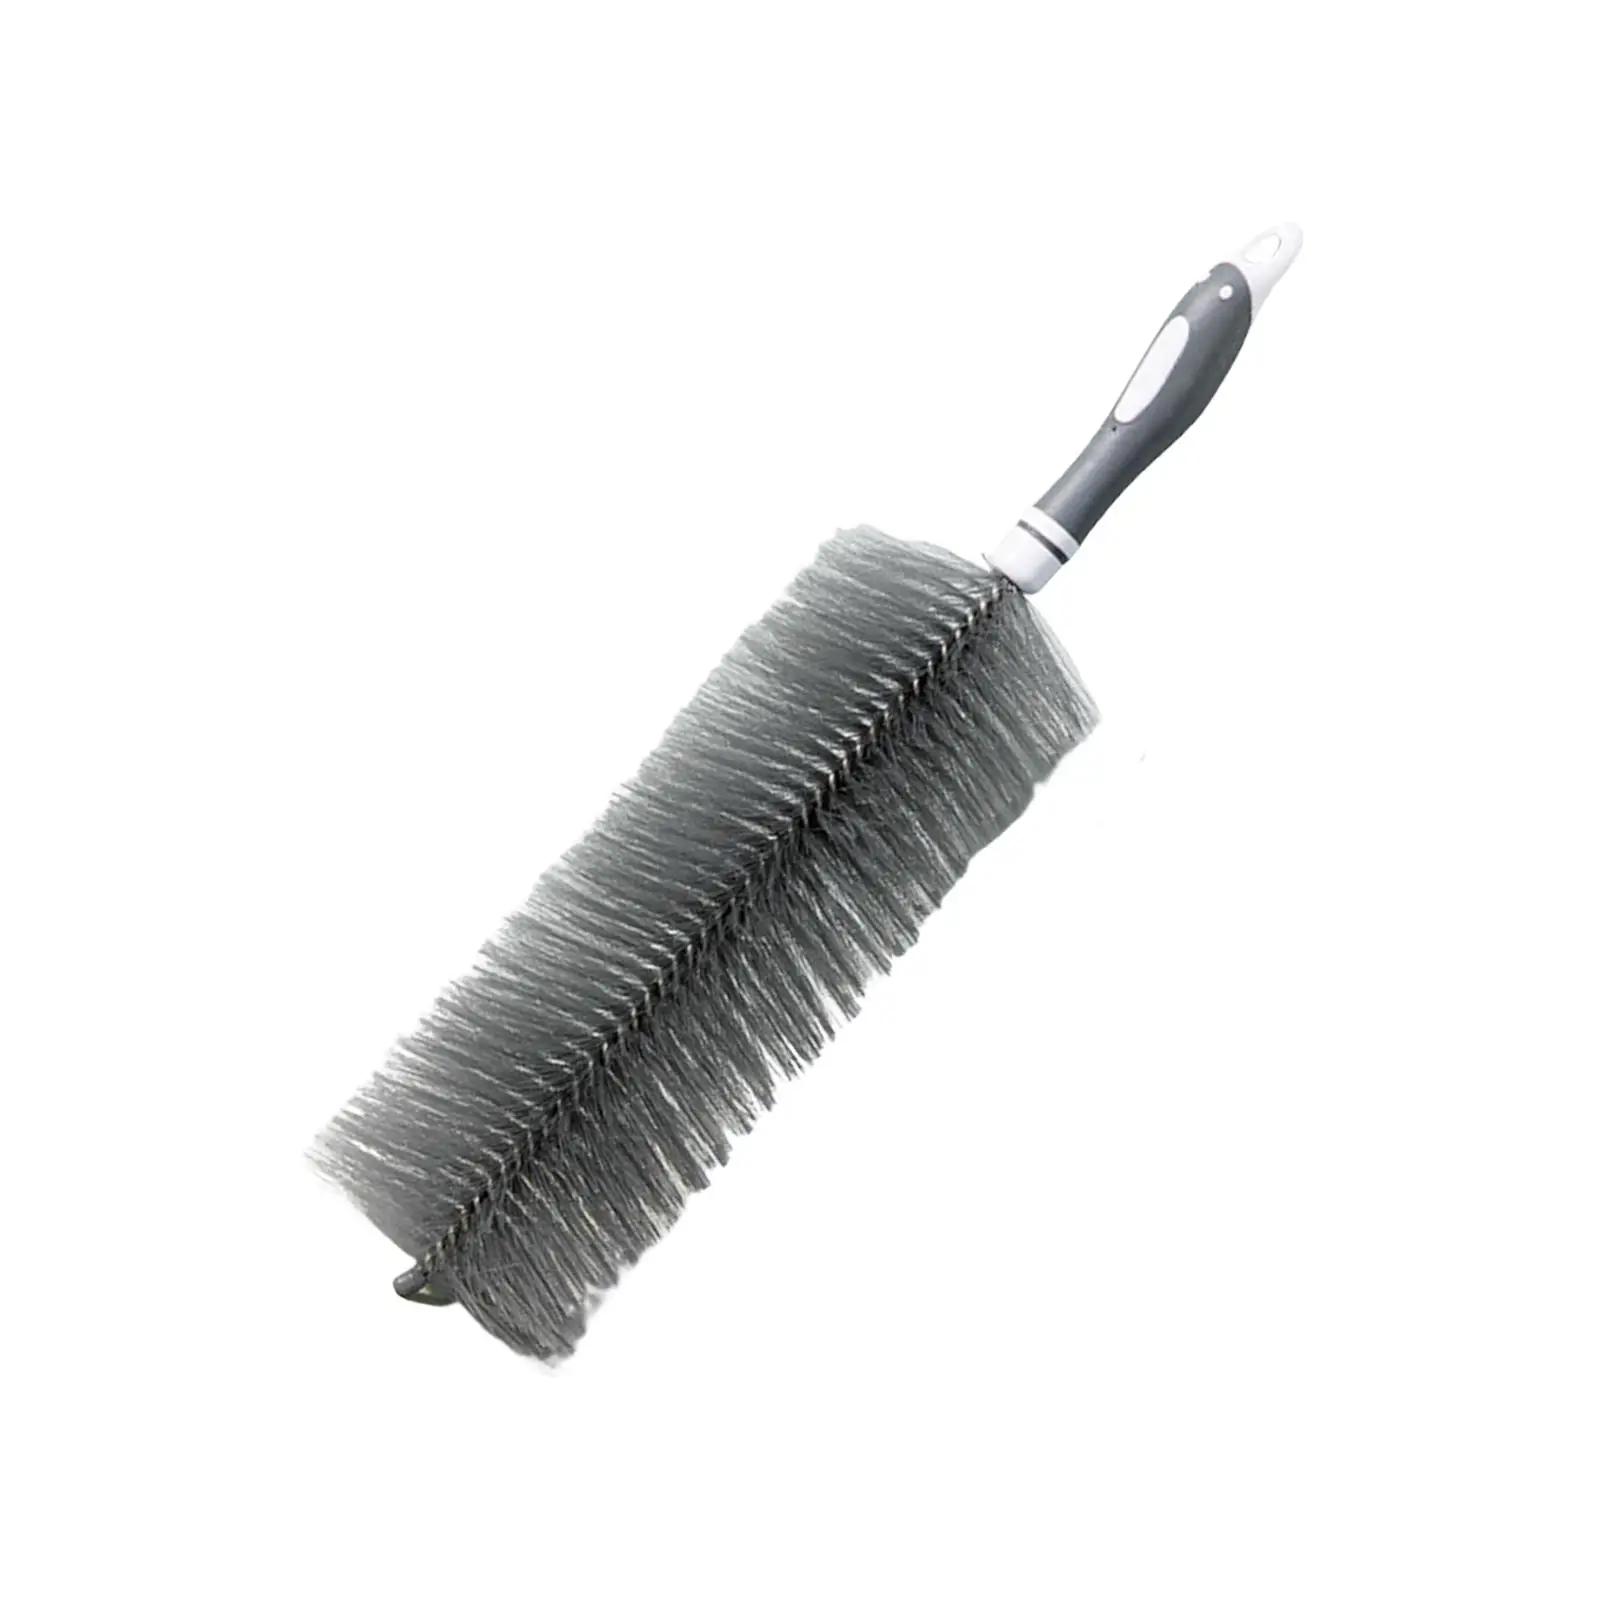 Hand Dust Cleaner Extendable Hanging Duster Brush for Car Furniture